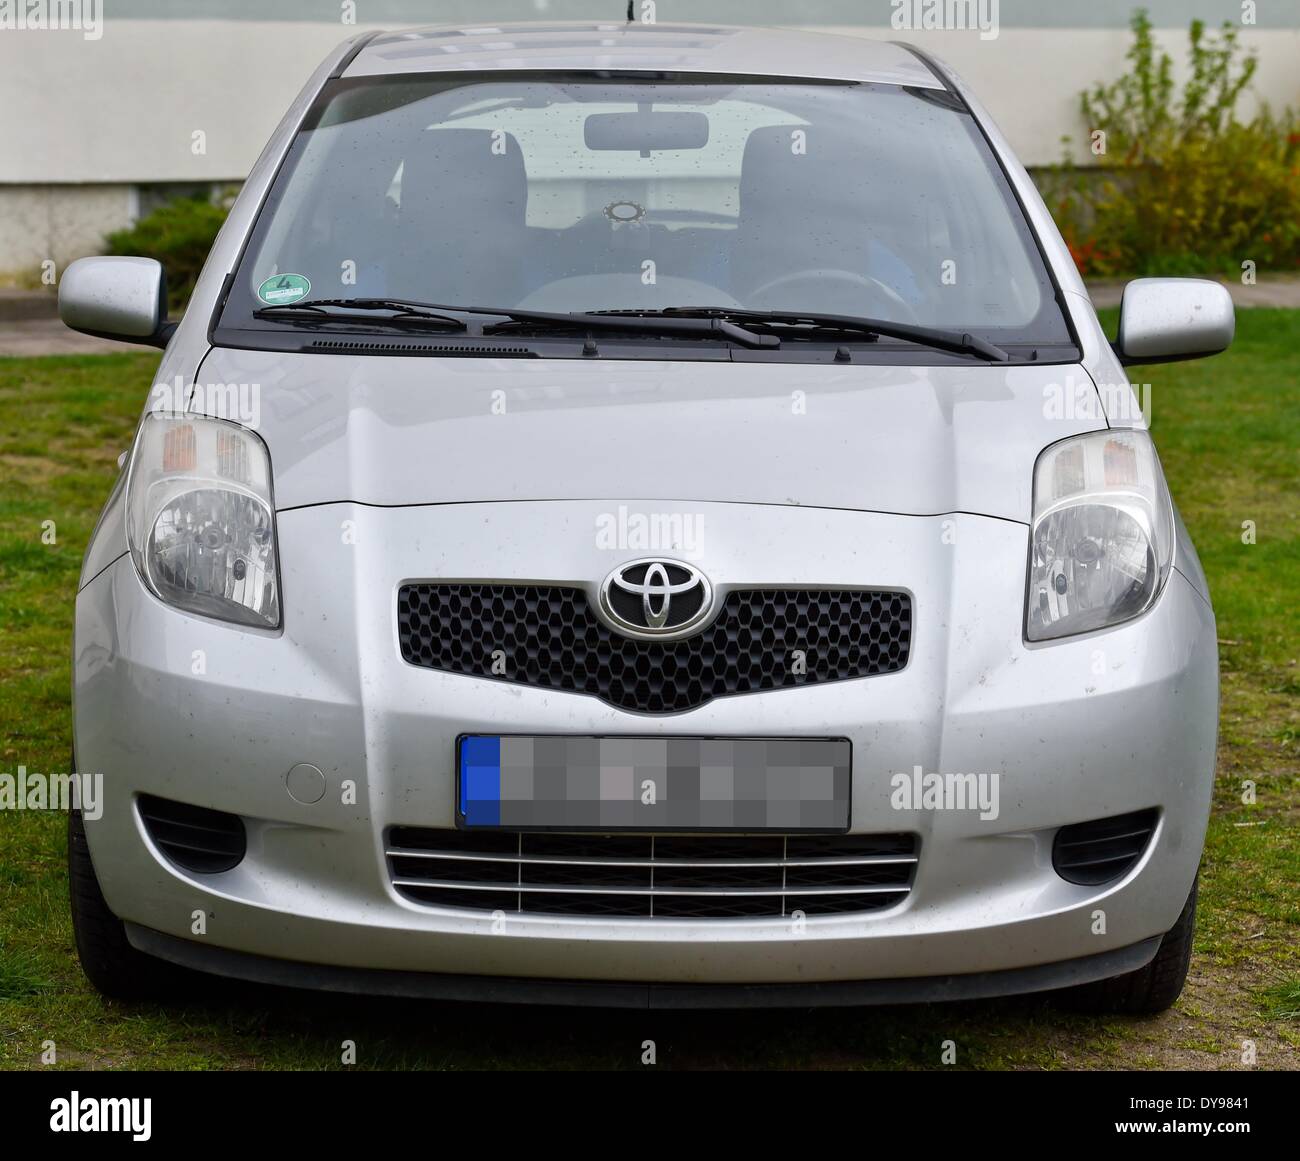 Fuerstenwalde, Germany. 9th Apr, 2014. A Toyota Yaris car model built in 2005 pictured in Fuerstenwalde, Germany, 9 April 2014. Toyota is again recalling millions of its cars worldwide. More than 6 million vehicles are affected by the recall, around 92.000 vehicles in Germany alone, Toyota stated in Cologne, on 9 April 2014. Cars of the model series Yaris, built between 2005 and 2010, may show problems Photo: Patrick Pleul/dpa/Alamy Live News Stock Photo